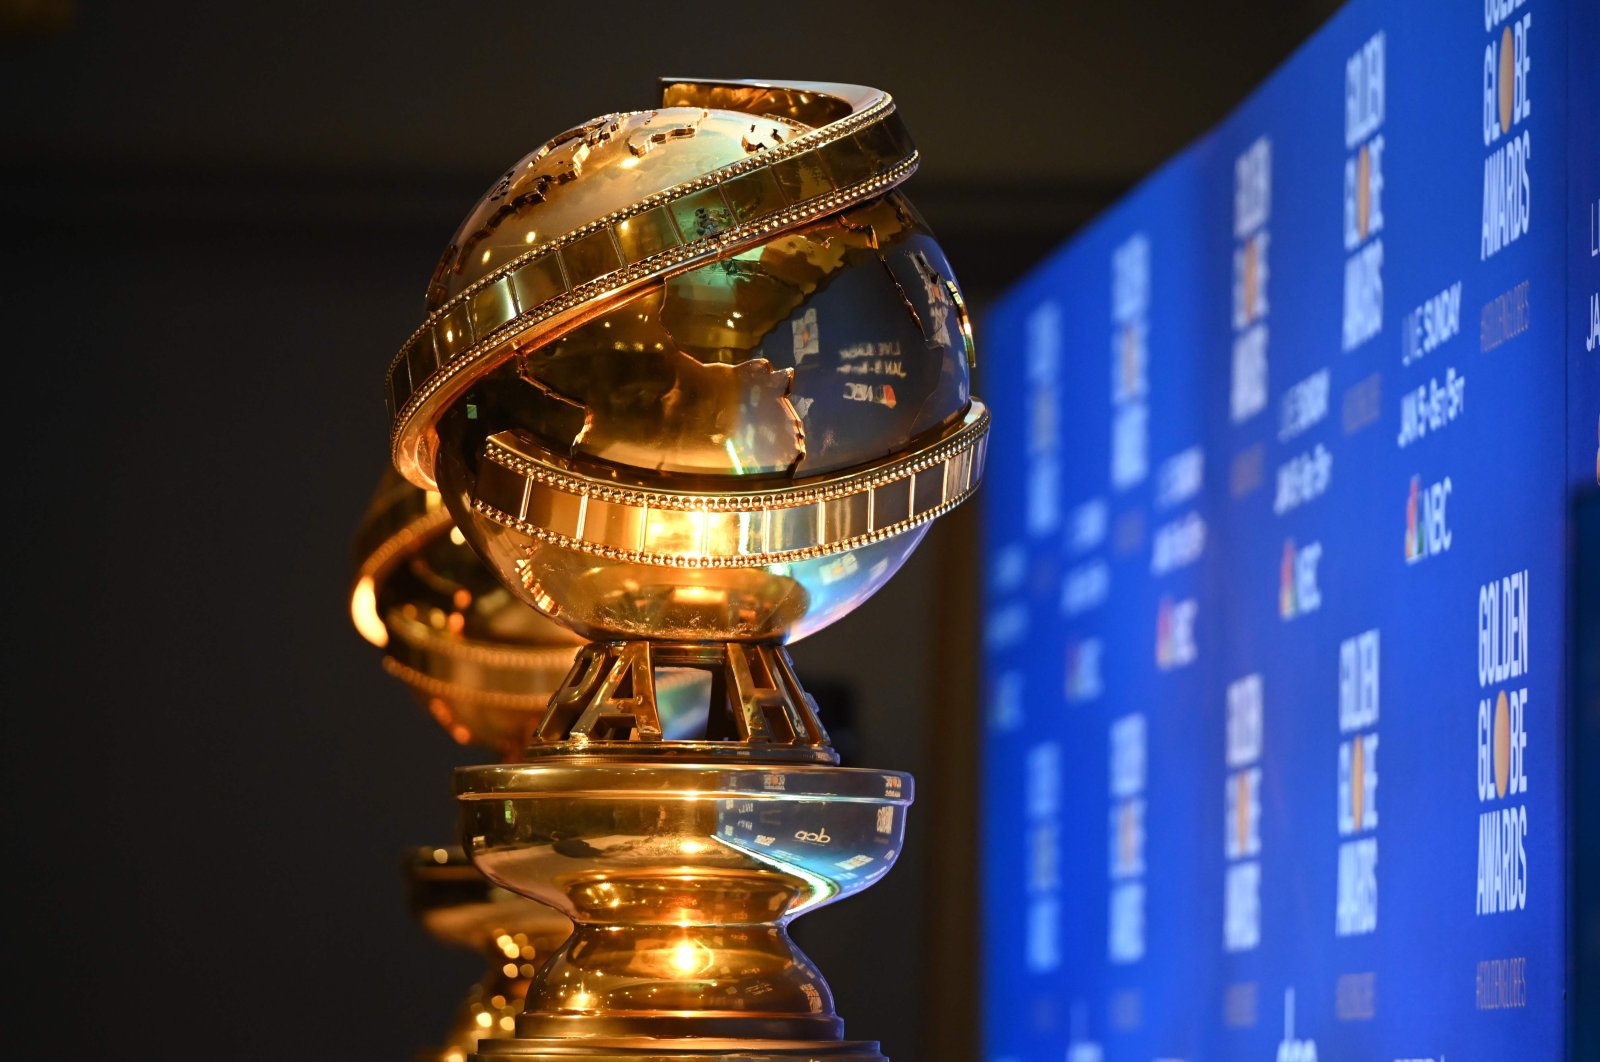 Golden Globe trophies are set by the stage ahead of the 77th Annual Golden Globe Awards nominations announcement at the Beverly Hilton hotel in Beverly Hills, U.S., Dec. 9, 2019. (AFP Photo)